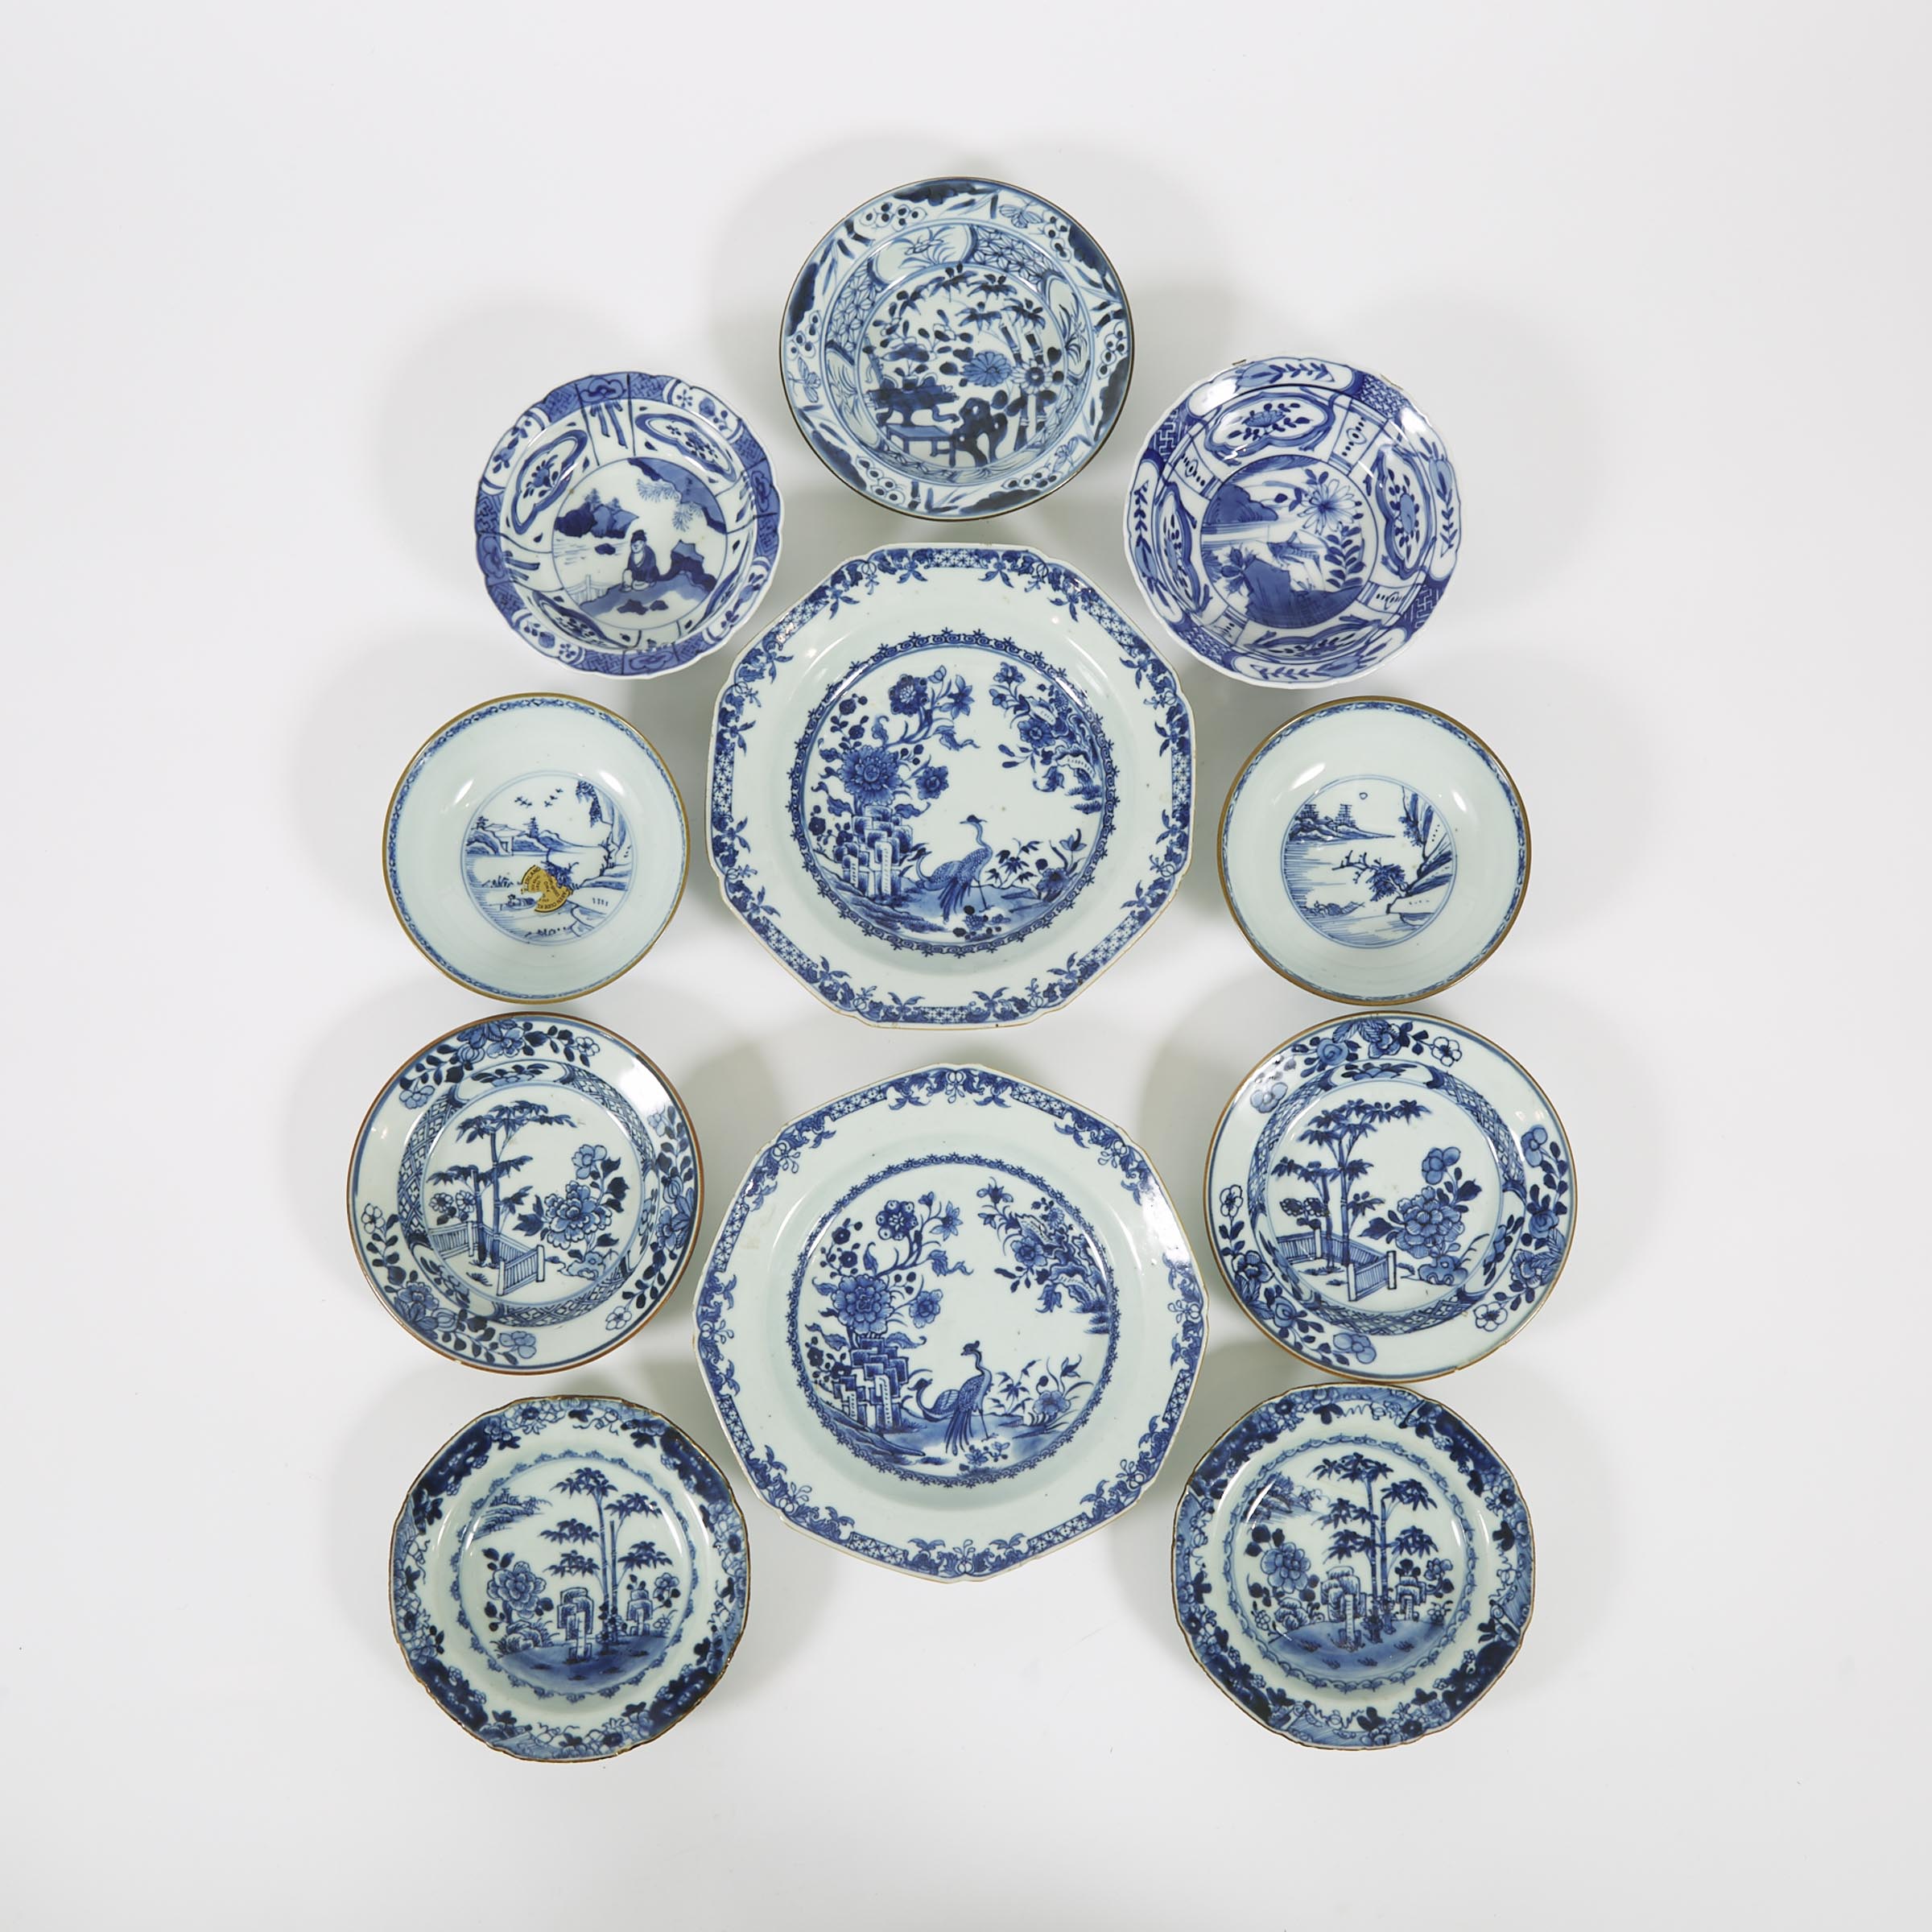 A Group of Eleven Export Blue and White Dishes, 17th/18th Century